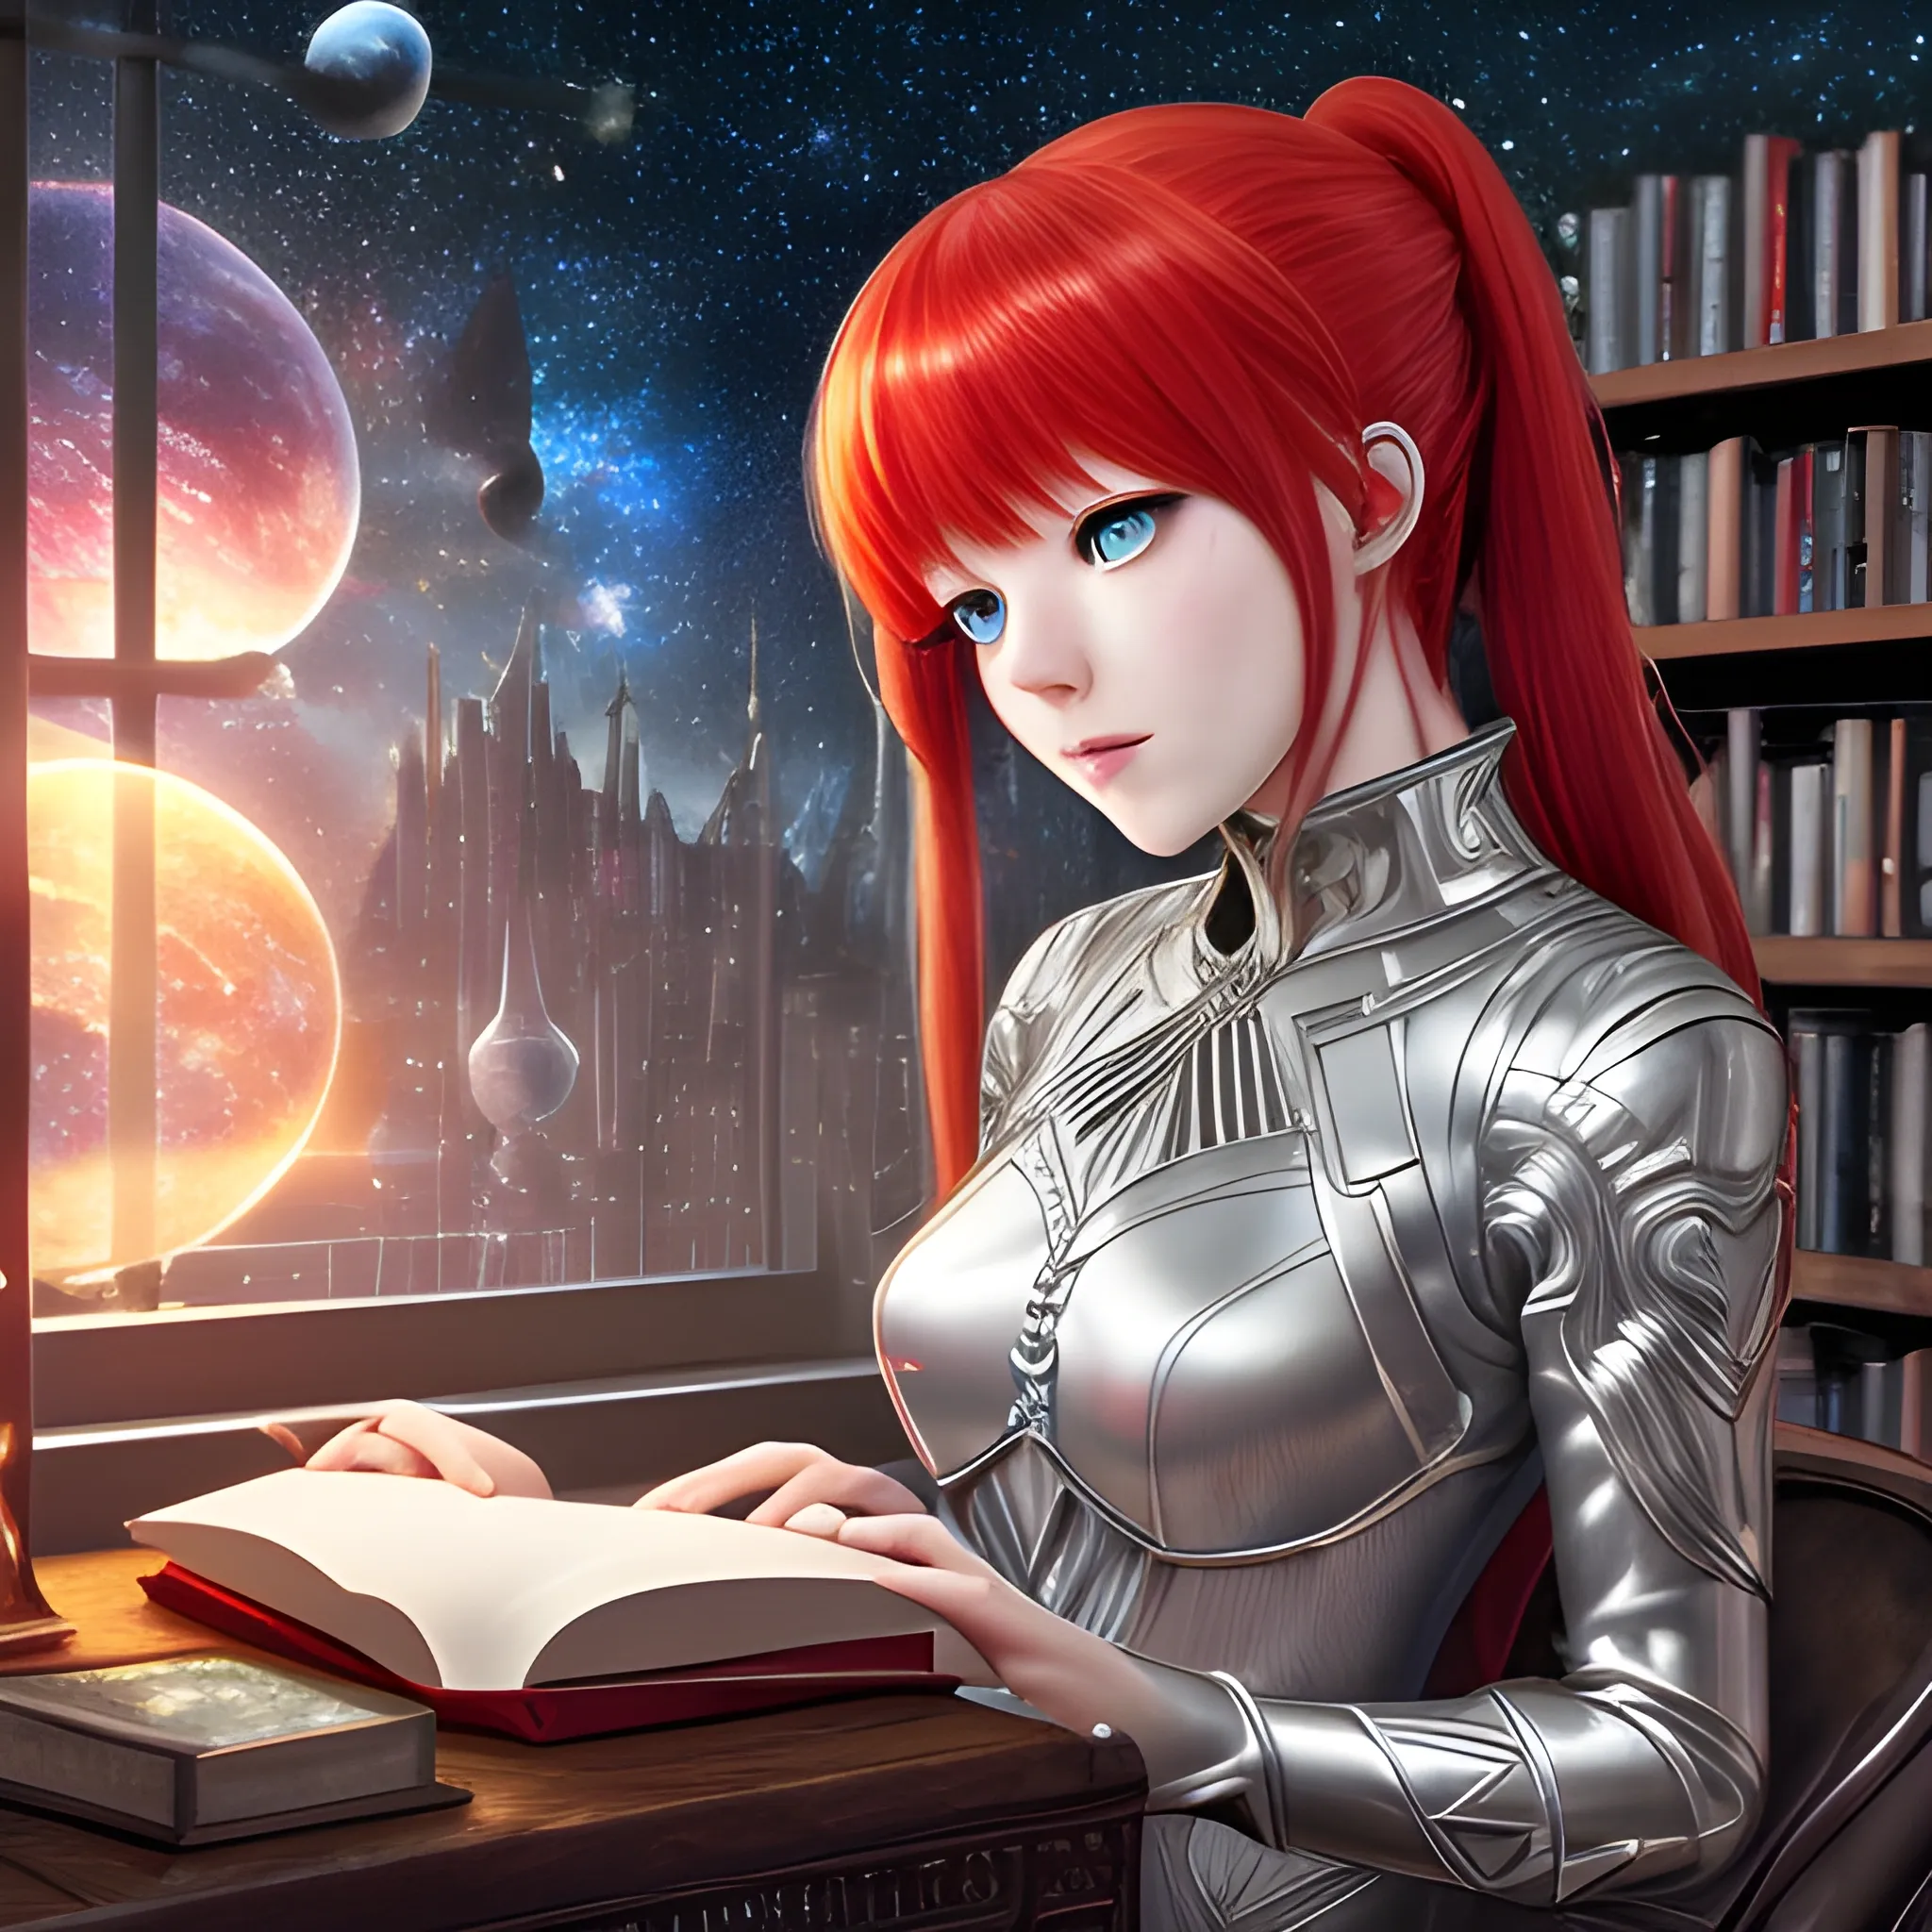 (((high detail))), best quality, (detailed), (high resolution) silver universe, books, books on a table, shelf with some books, studio ghiblin, anime, galaxy in the sky, woman reading a book ,red hair, red dress, black eyes, listen to music 
 
, Trippy, 
